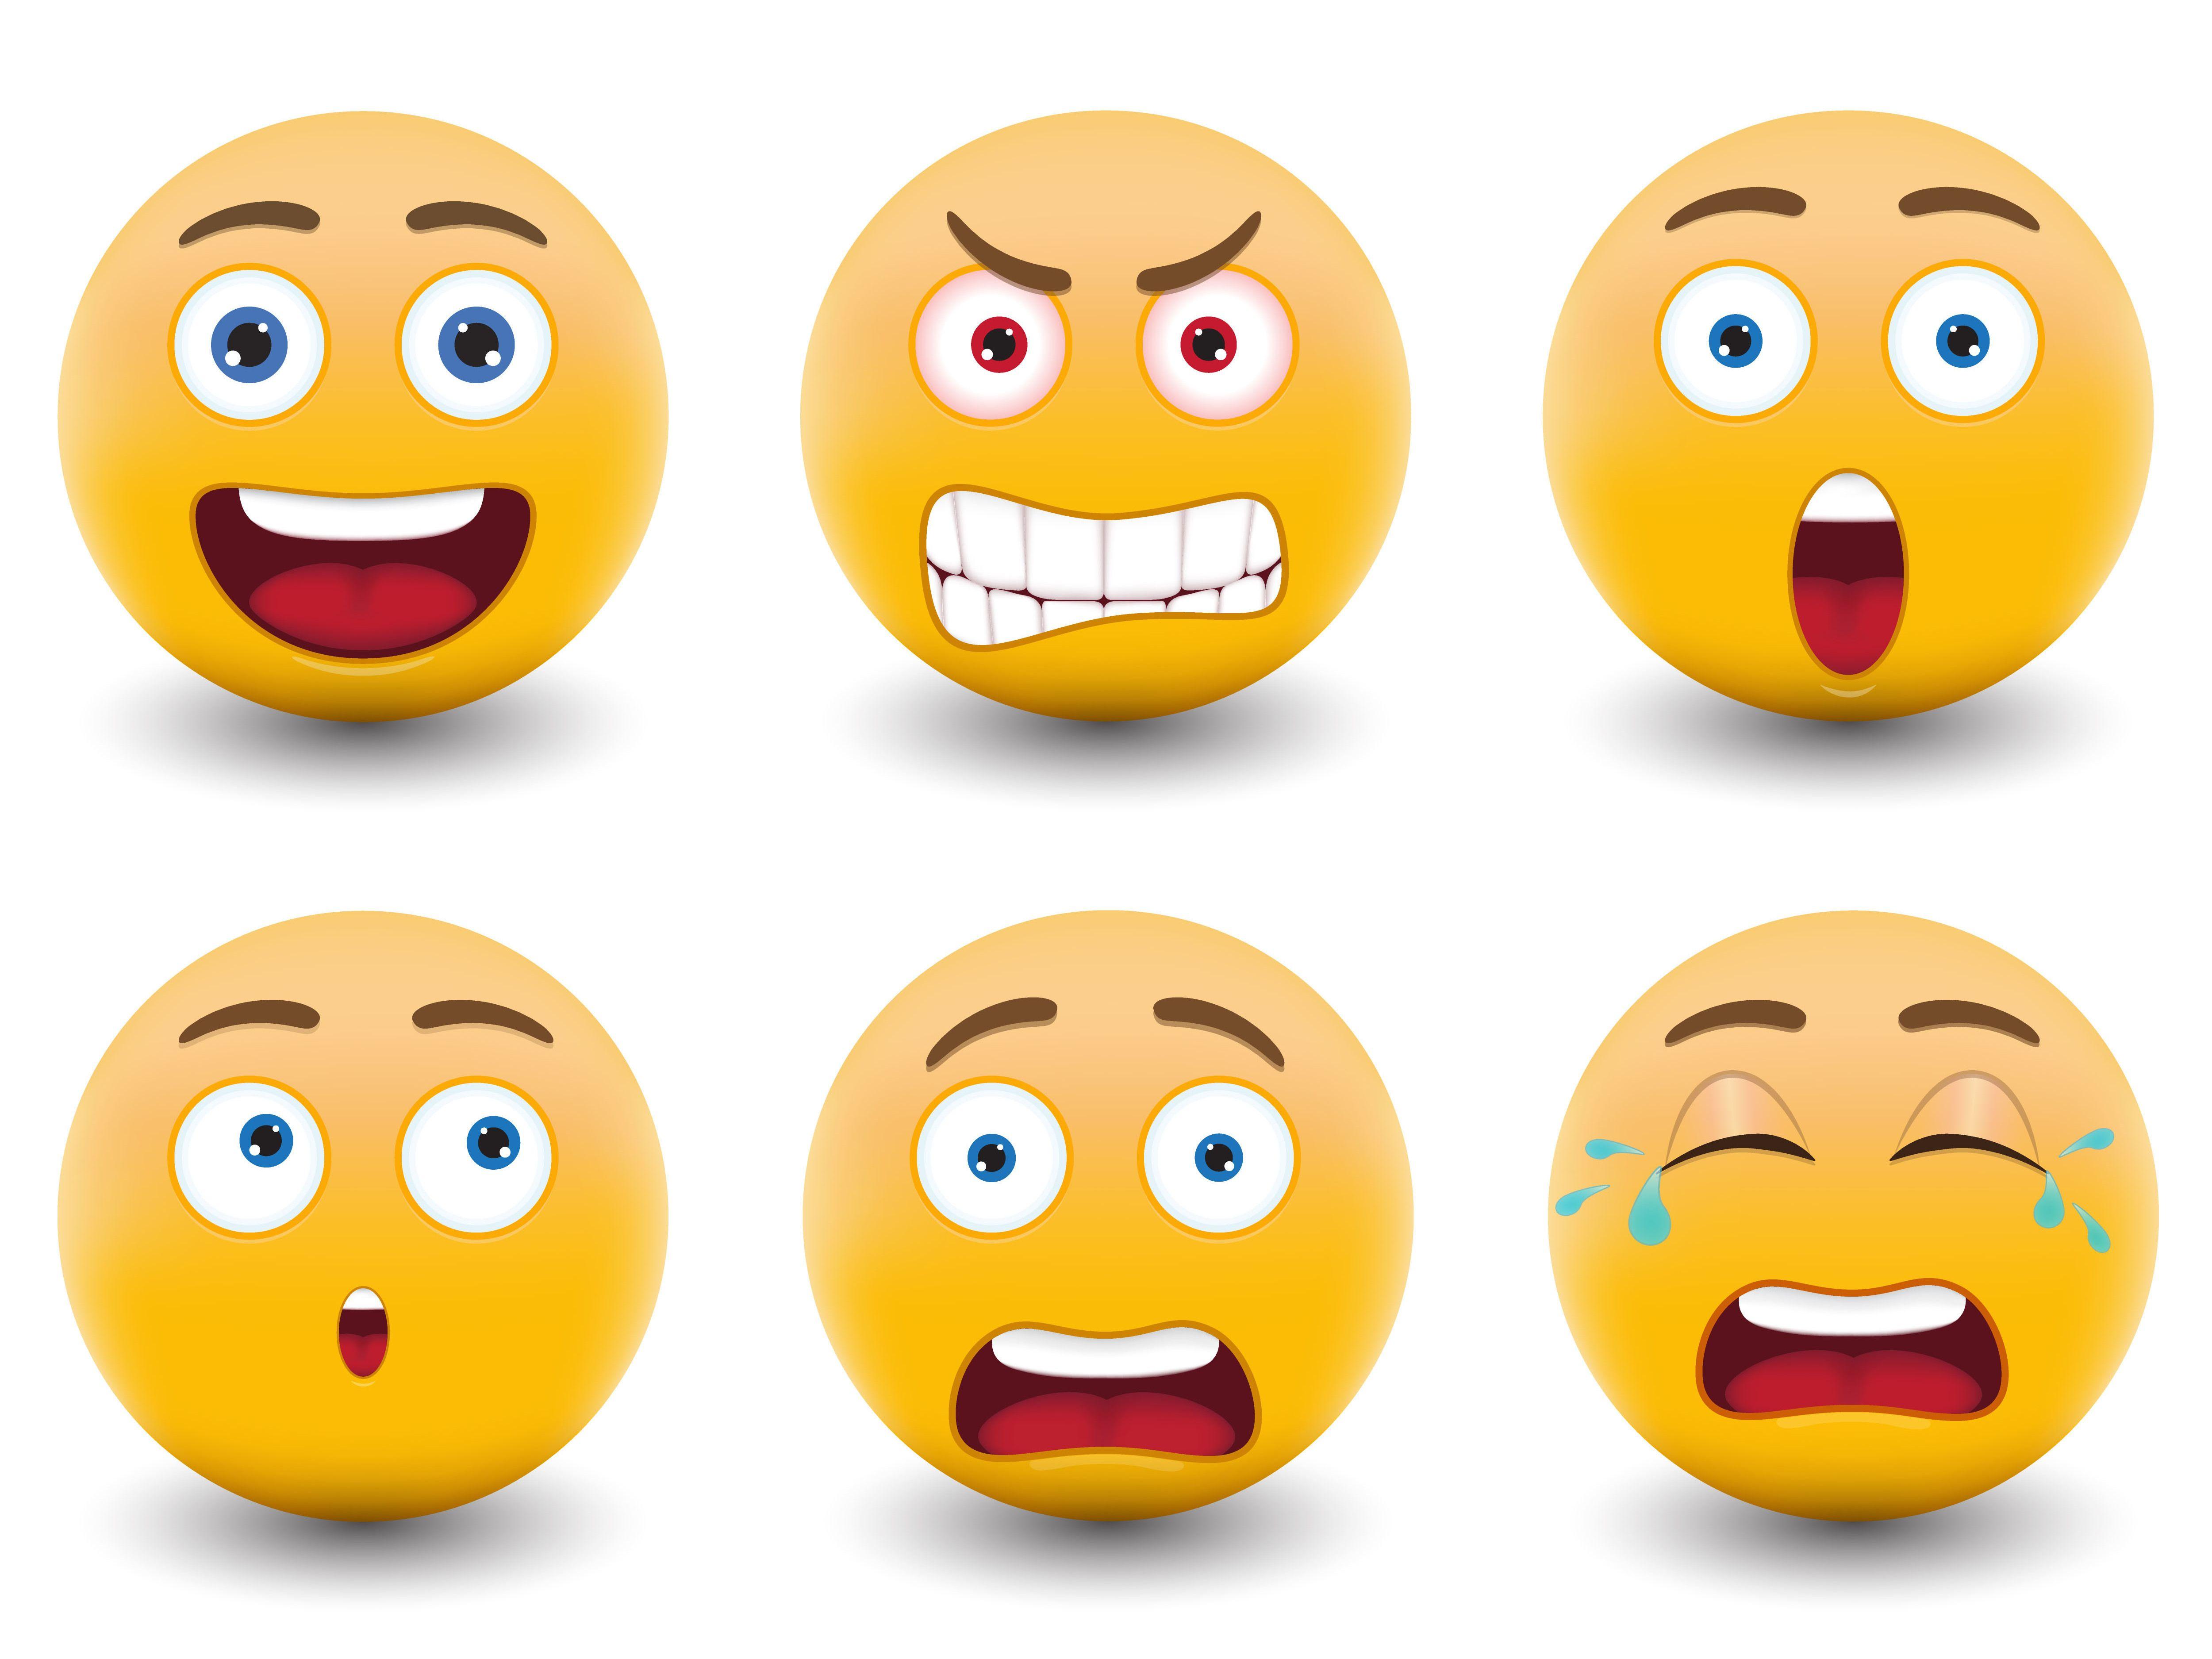 Other Wallpaper: Happy Face Emoji Wallpapers High Quality